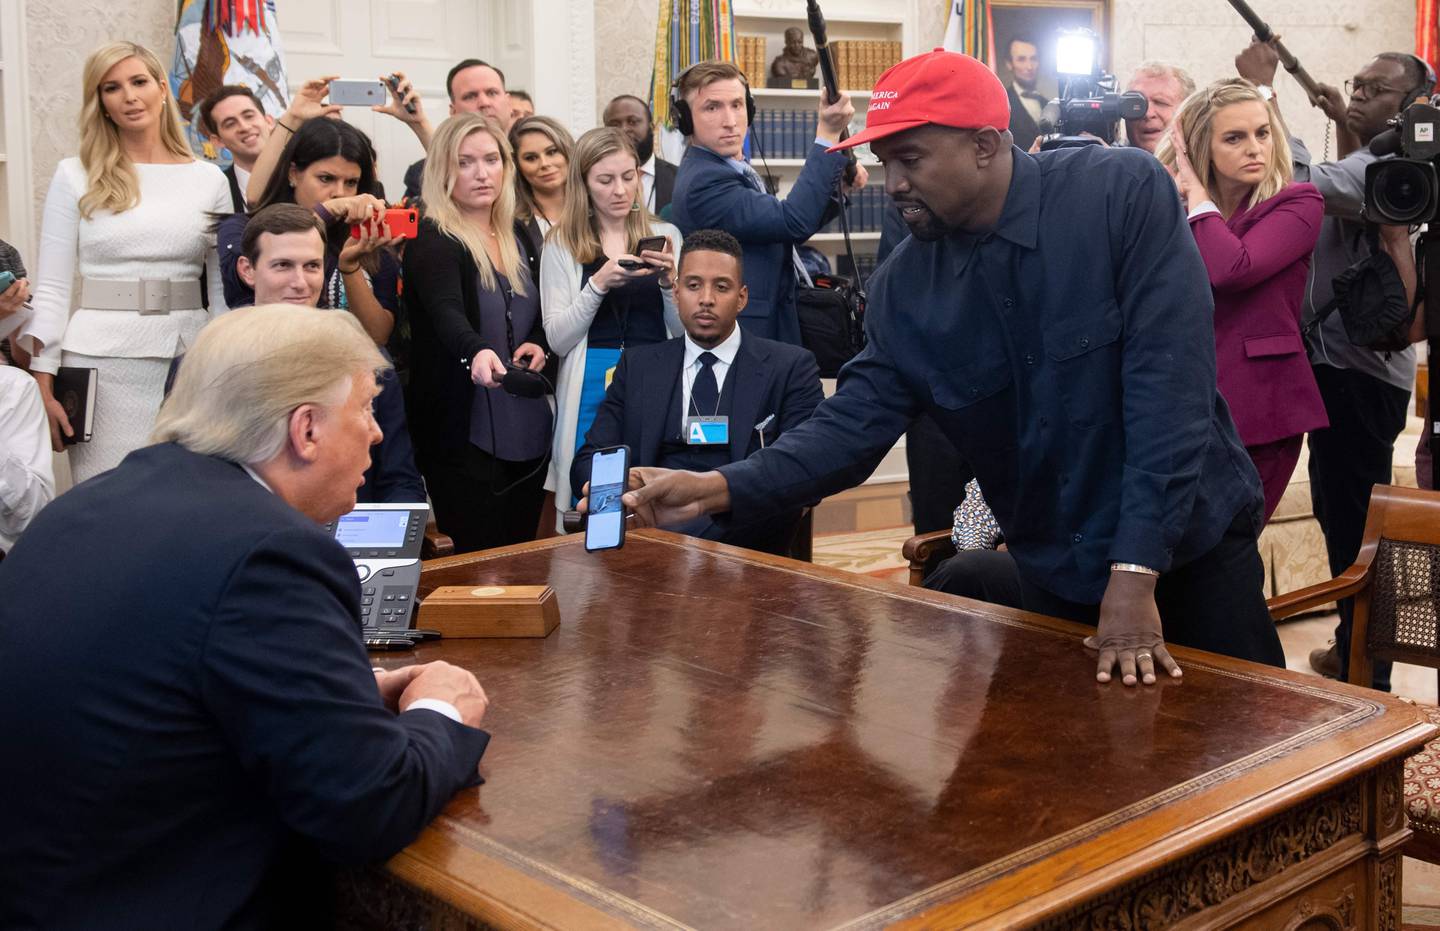 US President Donald Trump meets with rapper Kanye West (R) in the Oval Office of the White House in Washington, DC, on October 11, 2018. (Photo by SAUL LOEB / AFP)